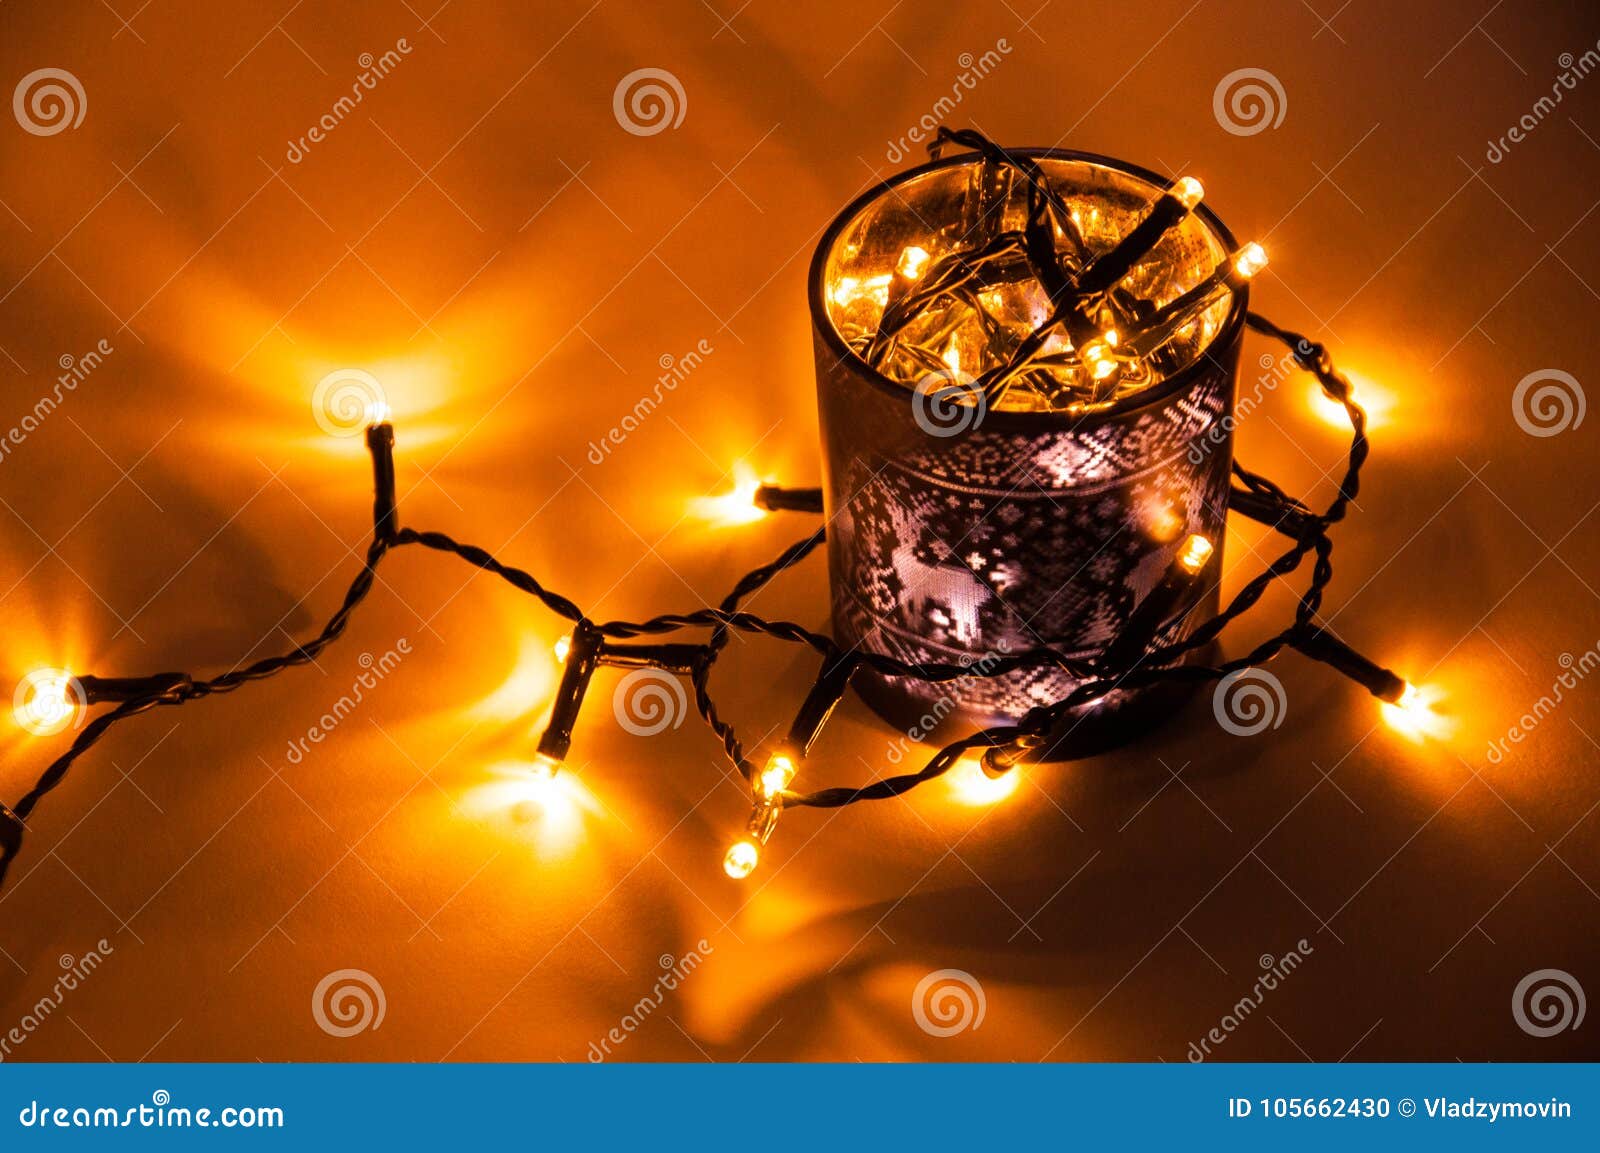 Christmas Lights in the Festive Cup Stock Photo - Image of decoration ...